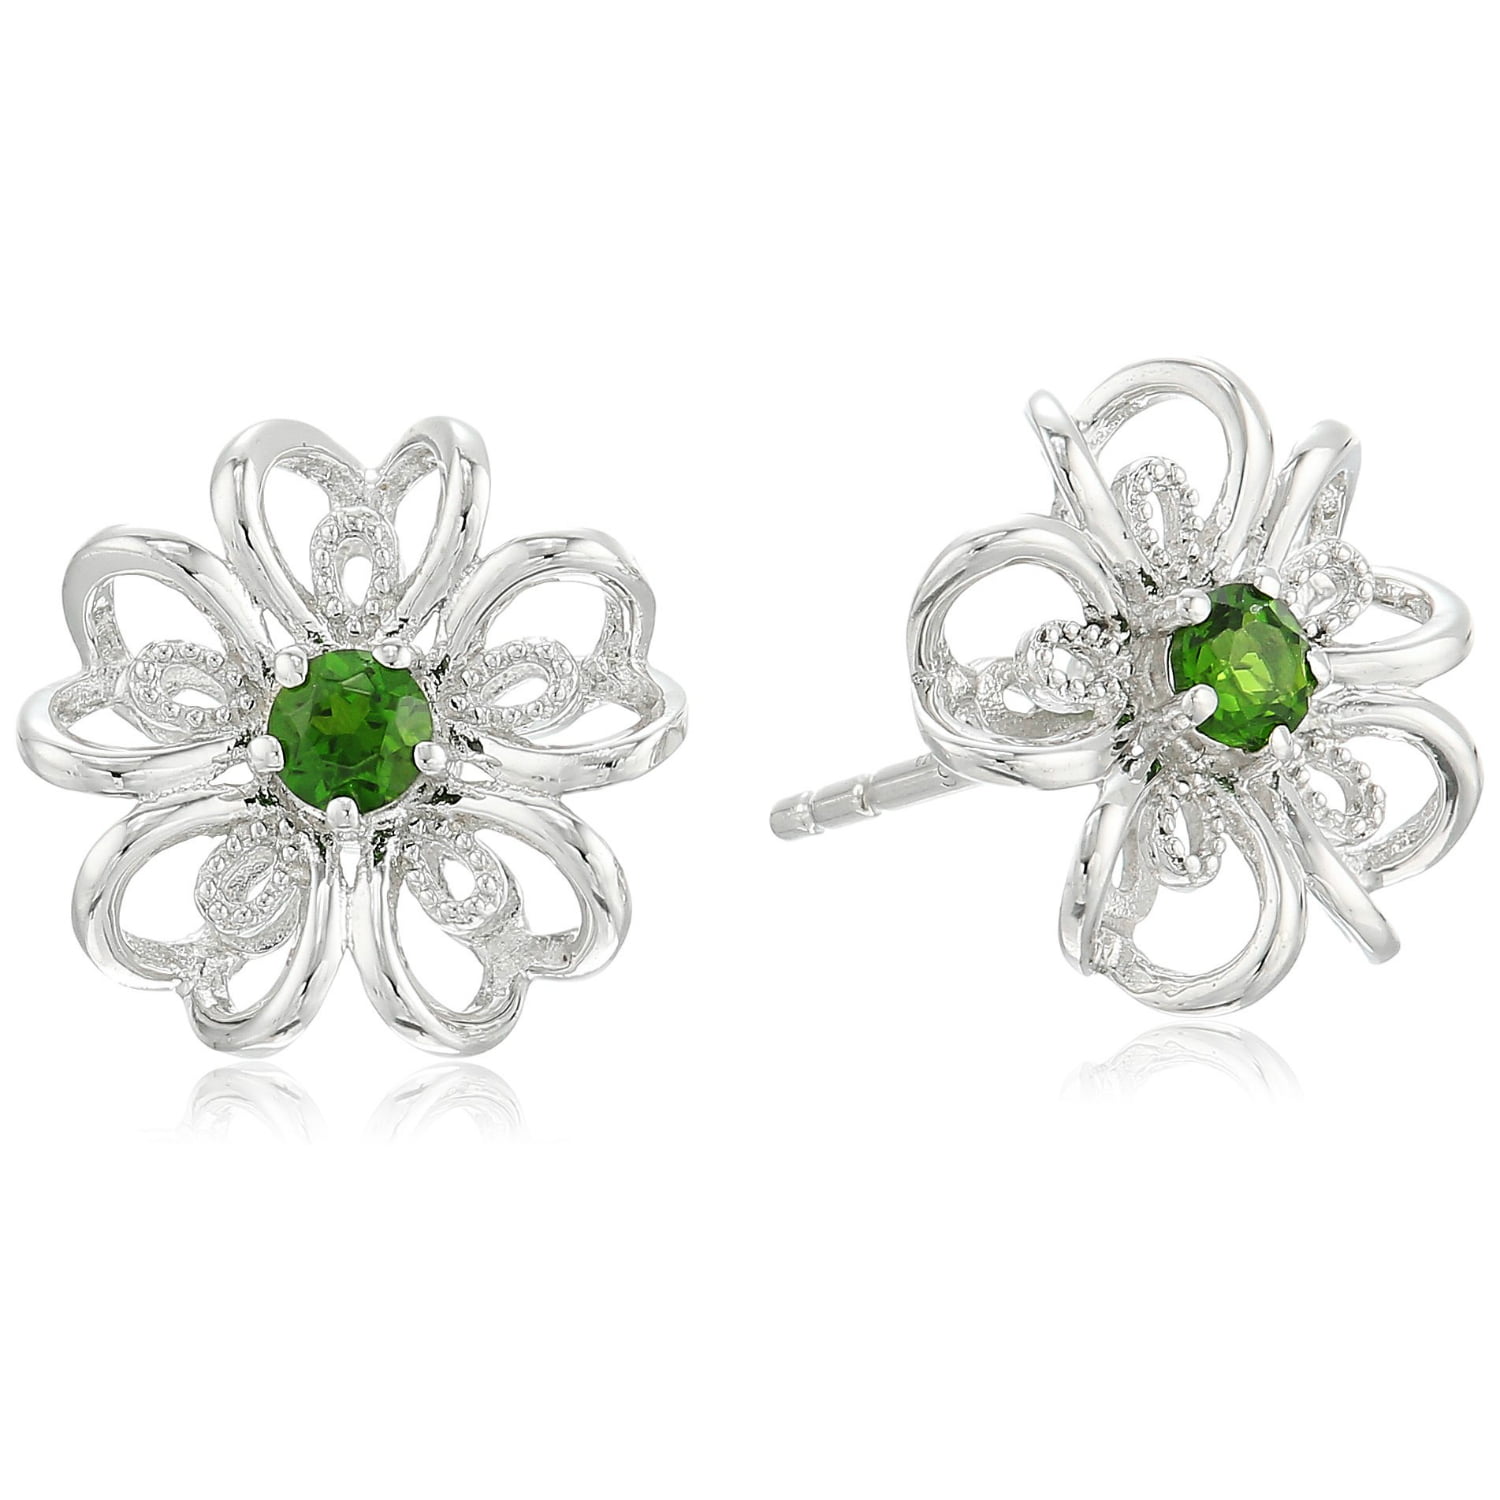 1.60 CT ovale vert Chrome Diopside 925 Sterling silver leverback Boucles d'oreilles 